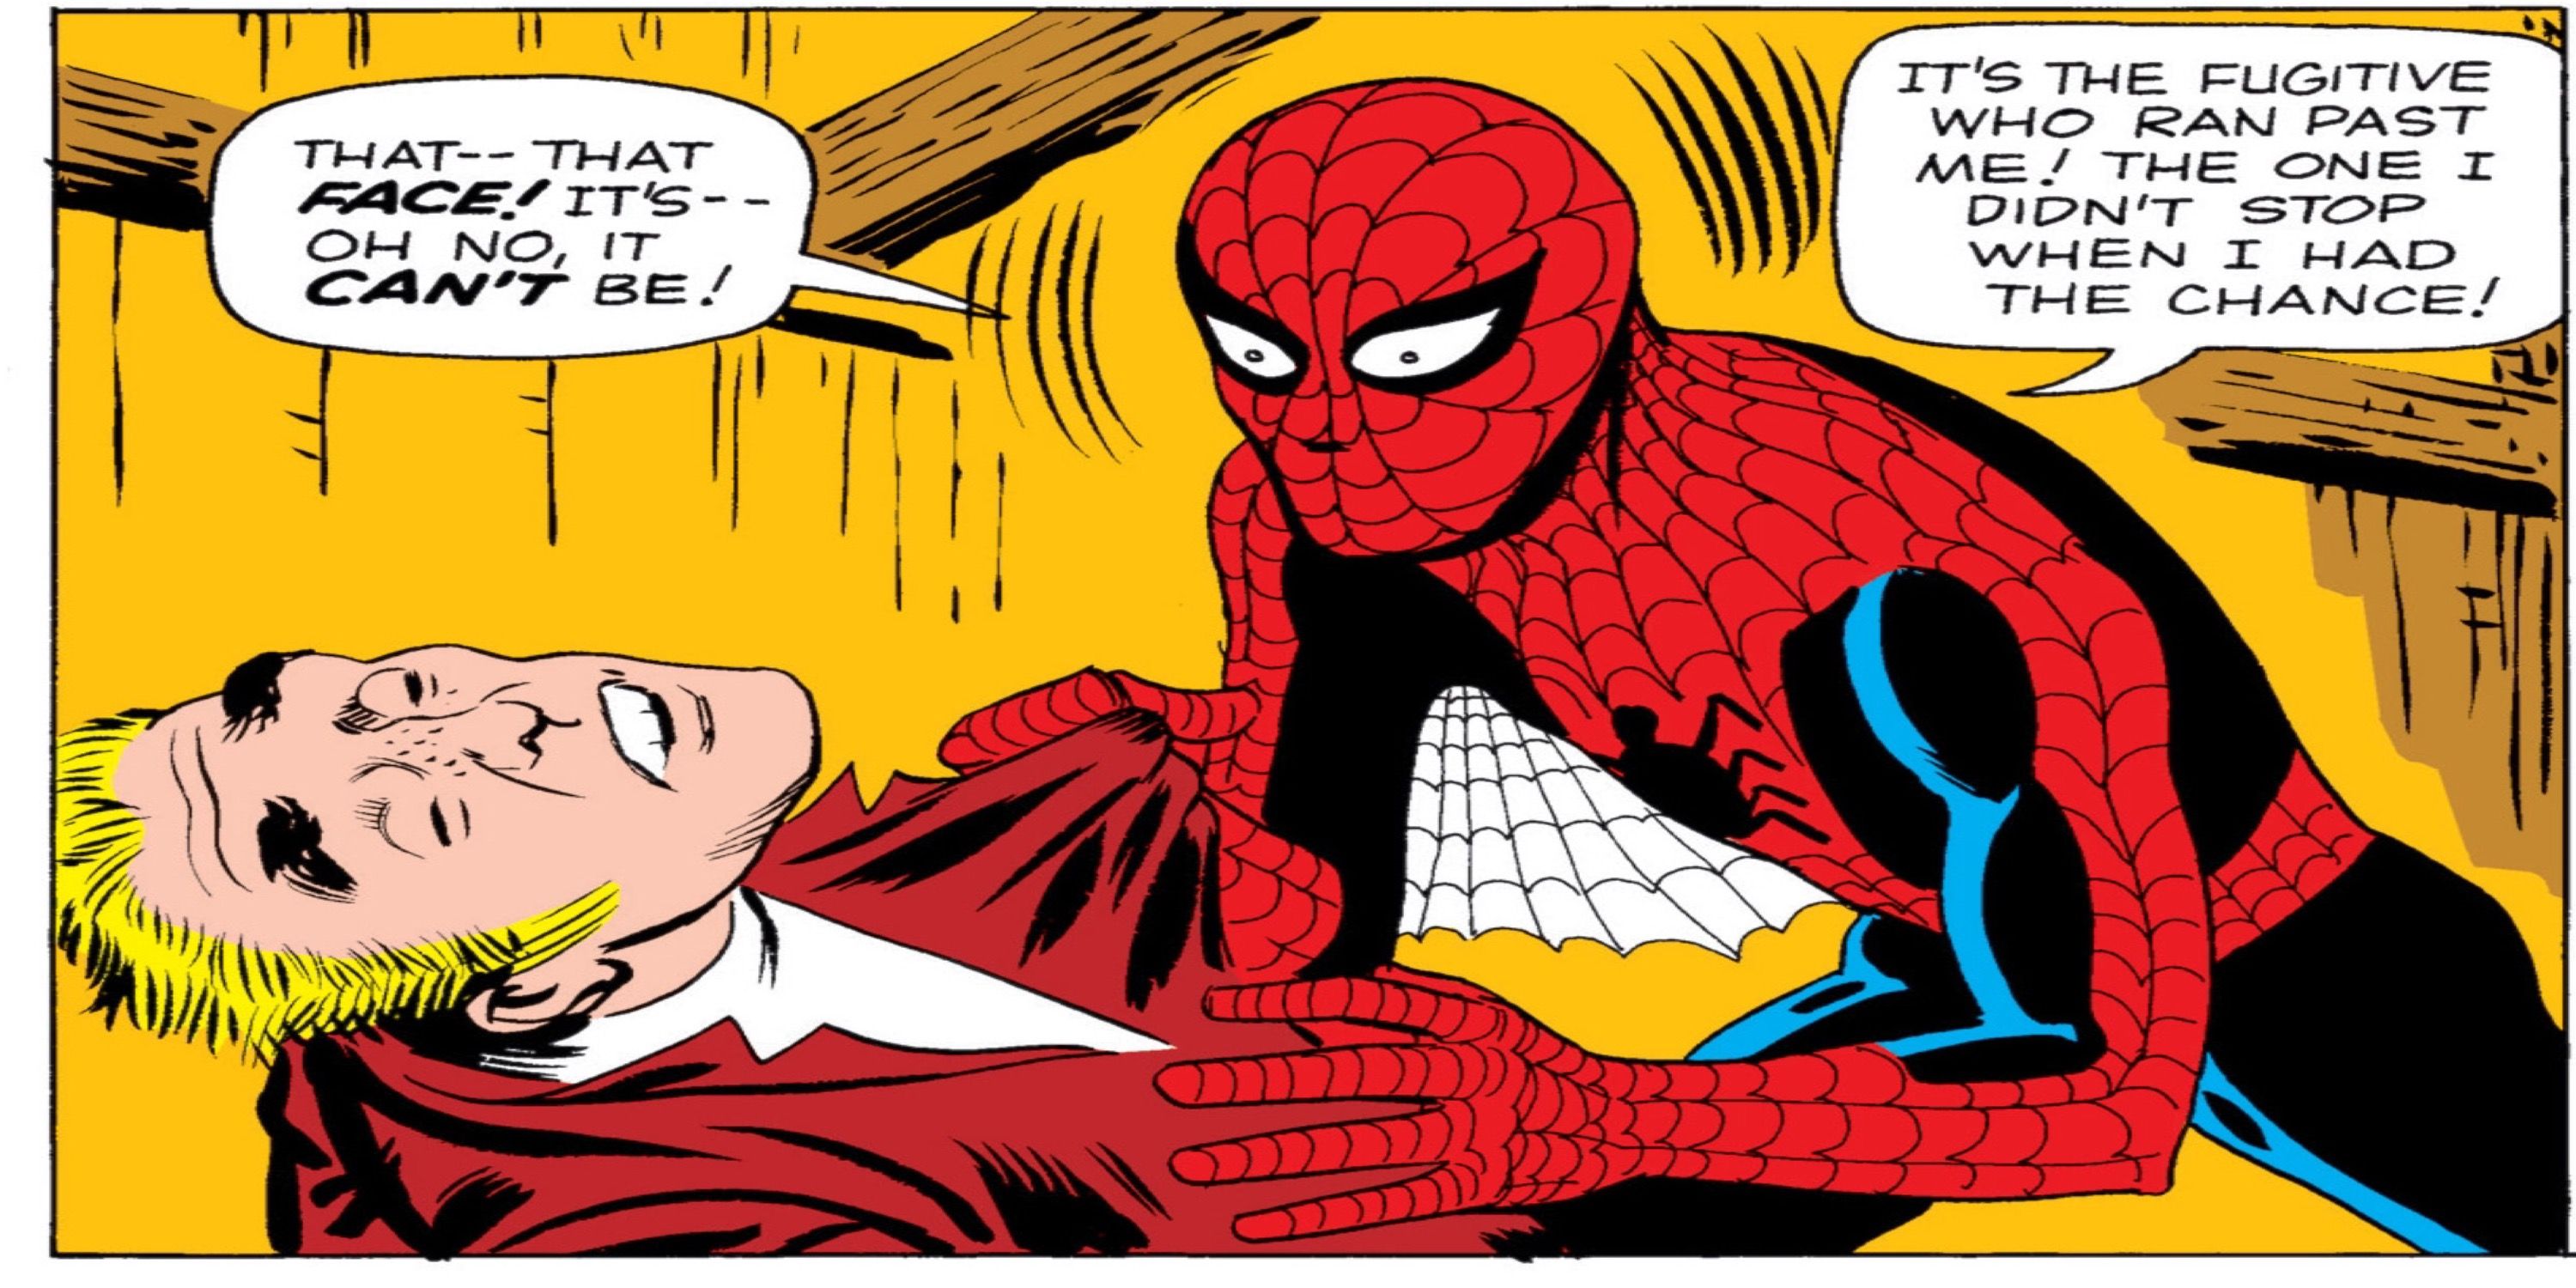 Spider-Man confronts man who killed Uncle Ben